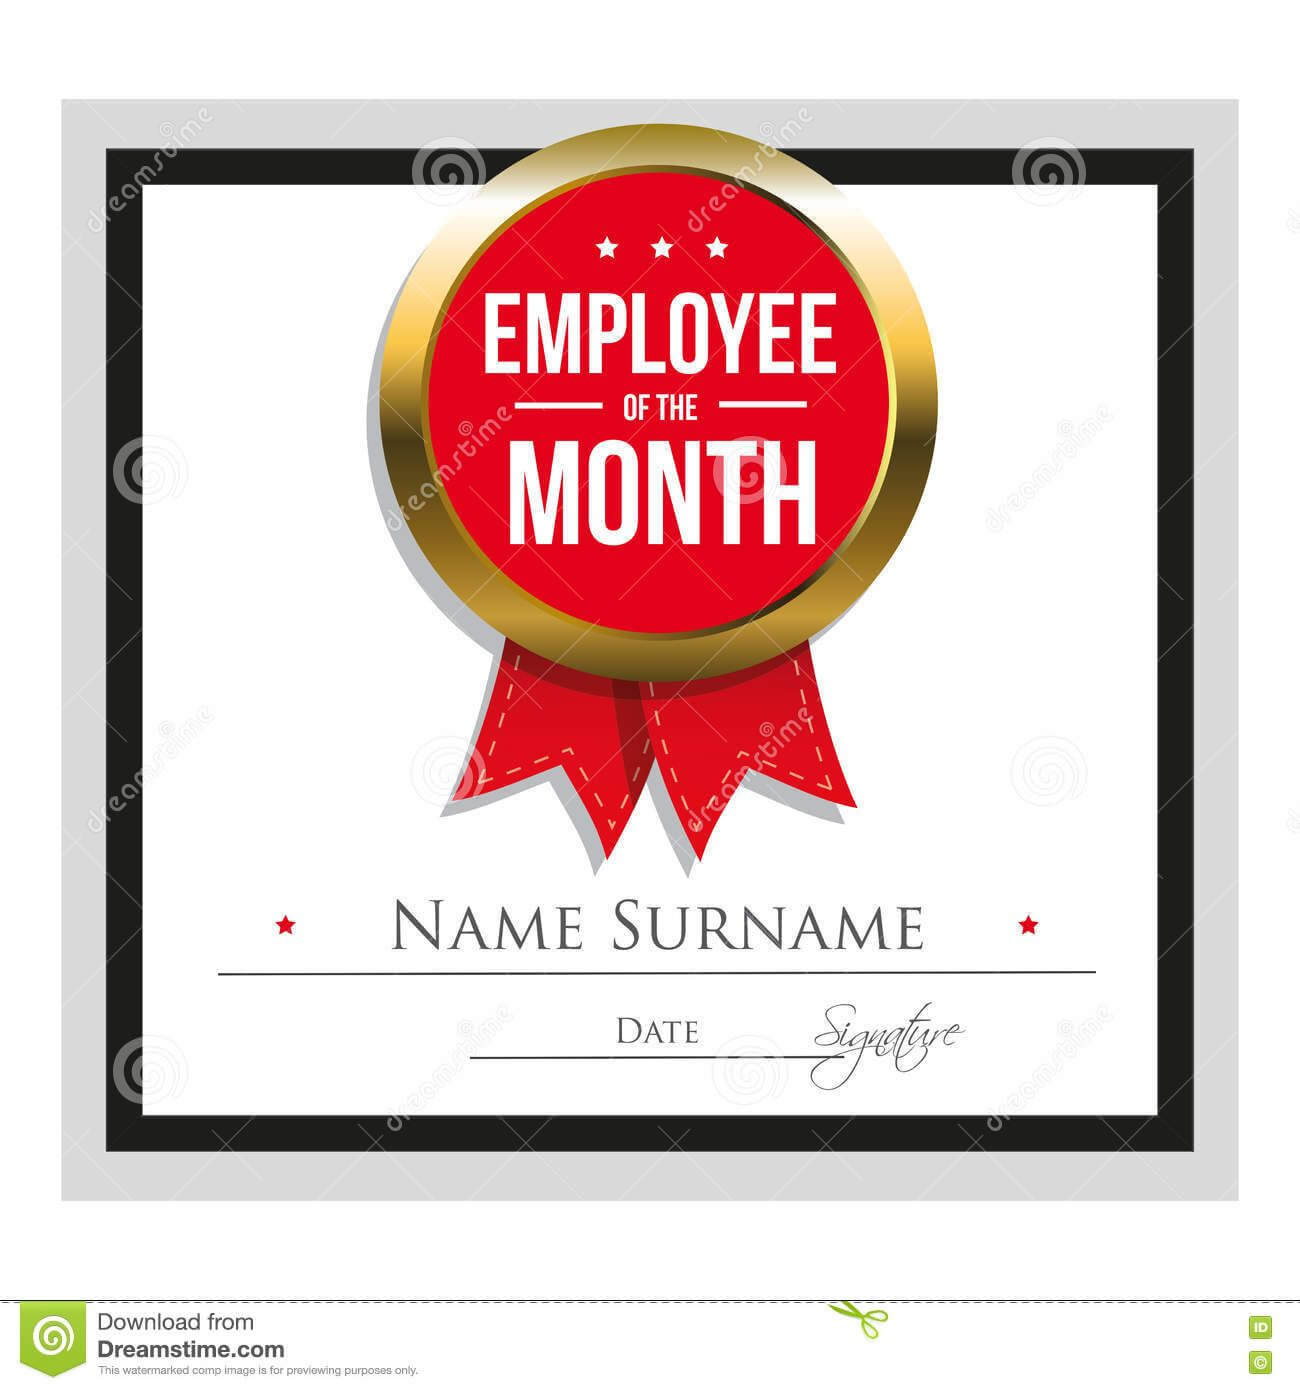 Employee Award Certificate Template Free Templates Design Inside Manager Of The Month Certificate Template